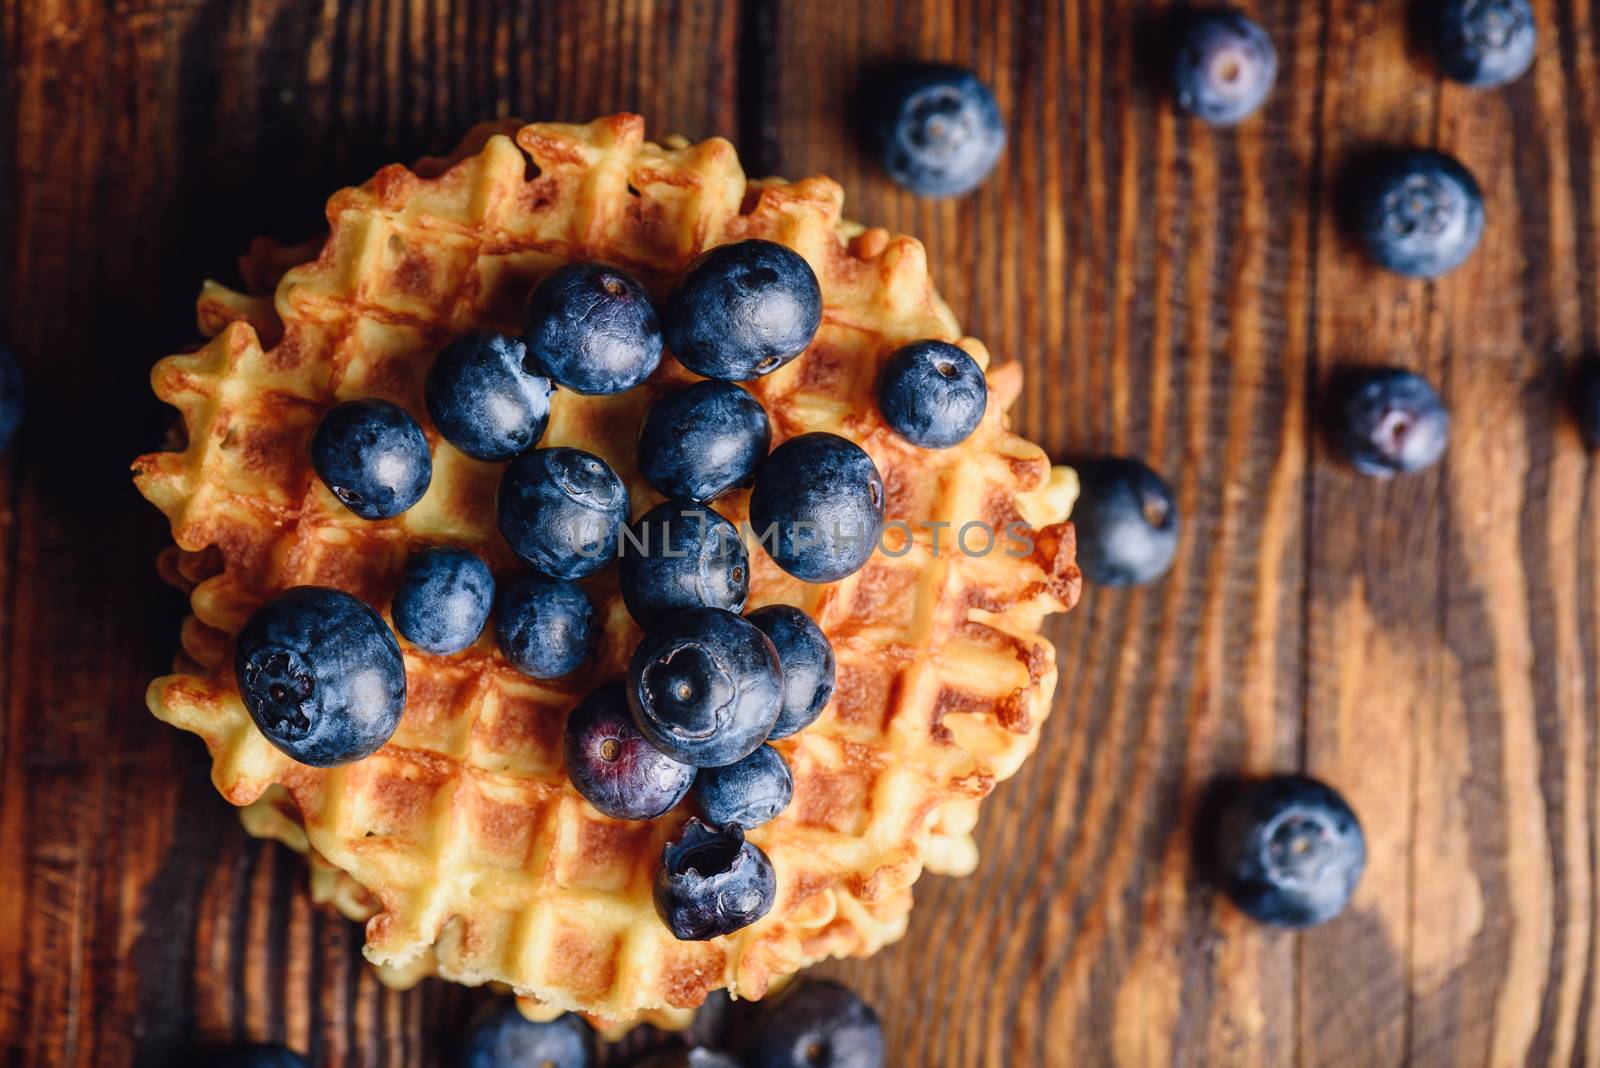 Blueberries on the Top of the Waffle and Other Scattered on Wooden Background. Copy Space on the Right.